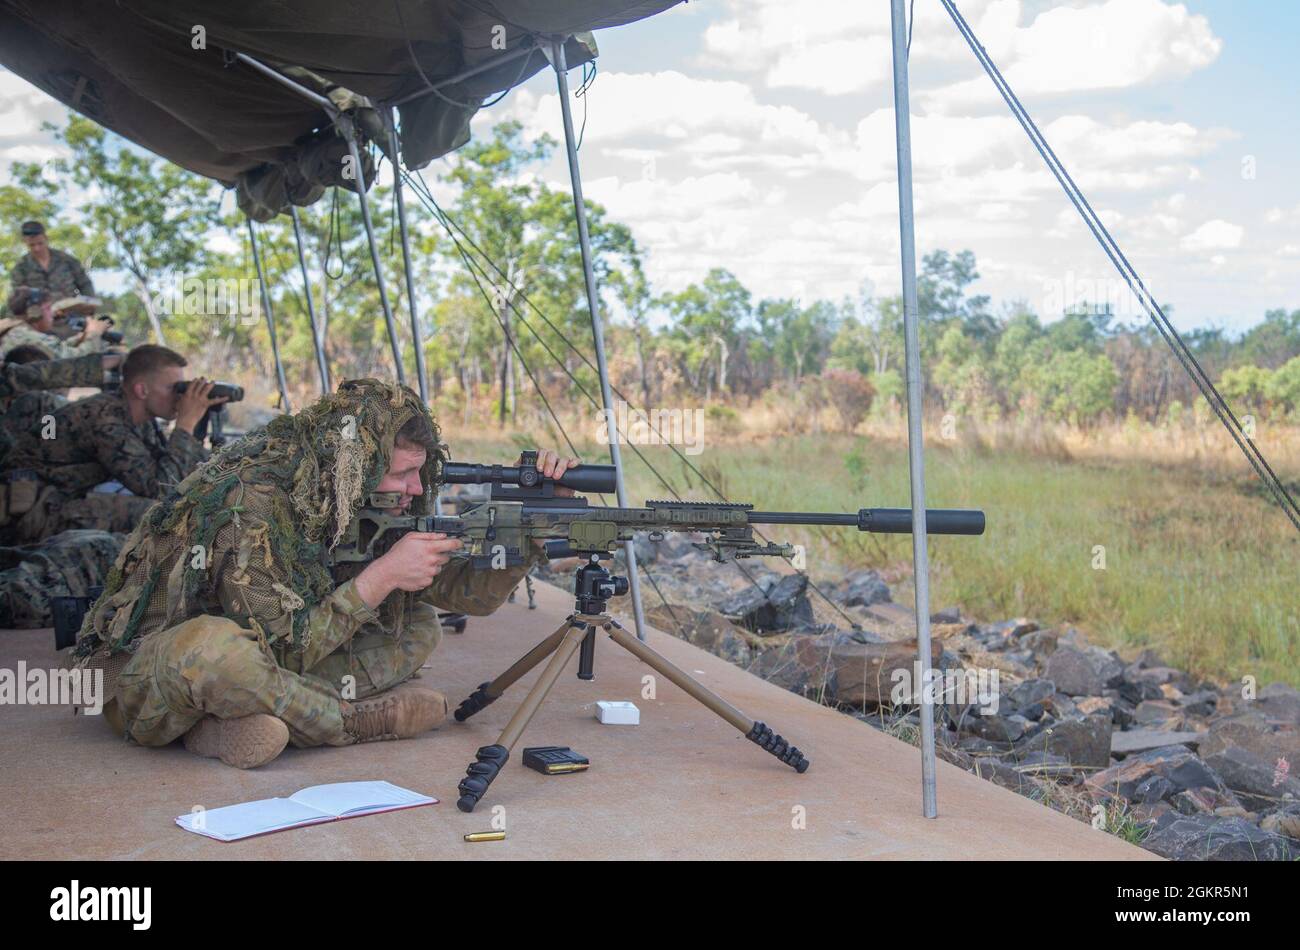 An Australian Army soldier sights in before firing a Blaser Tactical 2  Sniper Rifle during exercise Southern Jackaroo at Mount Bundey Training  Area, June 17, 2021. U.S. Marines with 1st Battalion, 7th